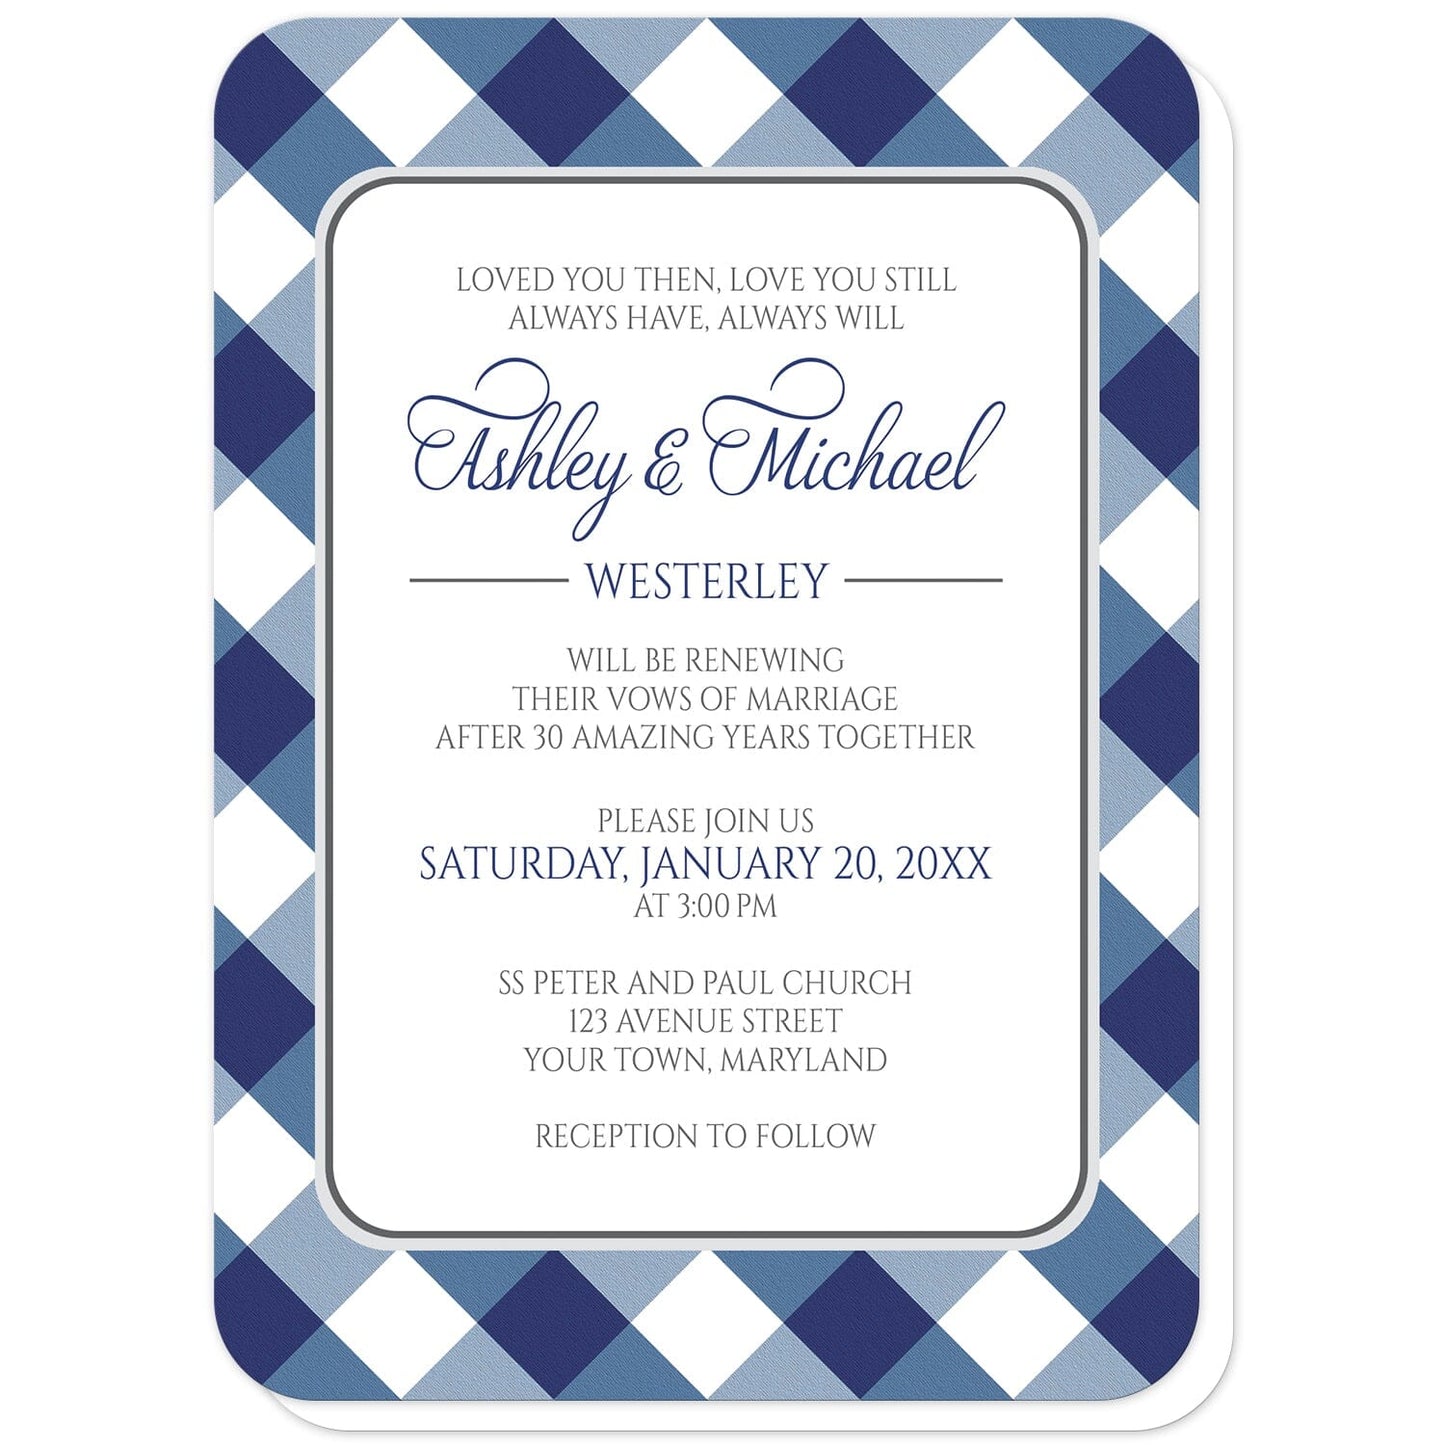 Navy Blue Gingham Vow Renewal Invitations (with rounded corners) at Artistically Invited. Navy blue gingham vow renewal invitations with your personalized vow renewal ceremony details custom printed in blue and gray inside a white rectangular area outlined in gray. The background design is a diagonal navy blue and white gingham pattern. 